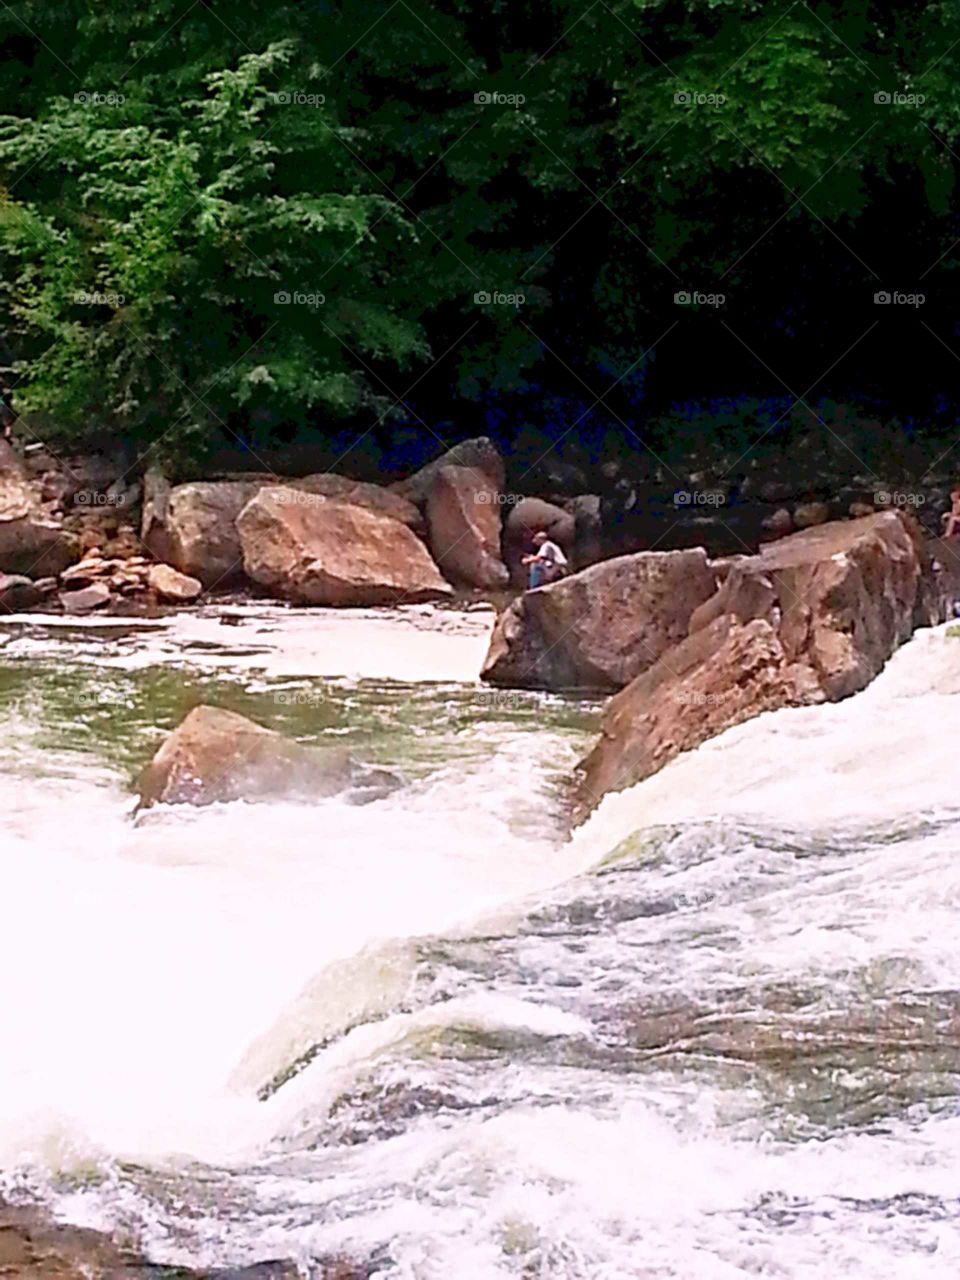 A river froths and foams as it churns quickly over boulders in its path.